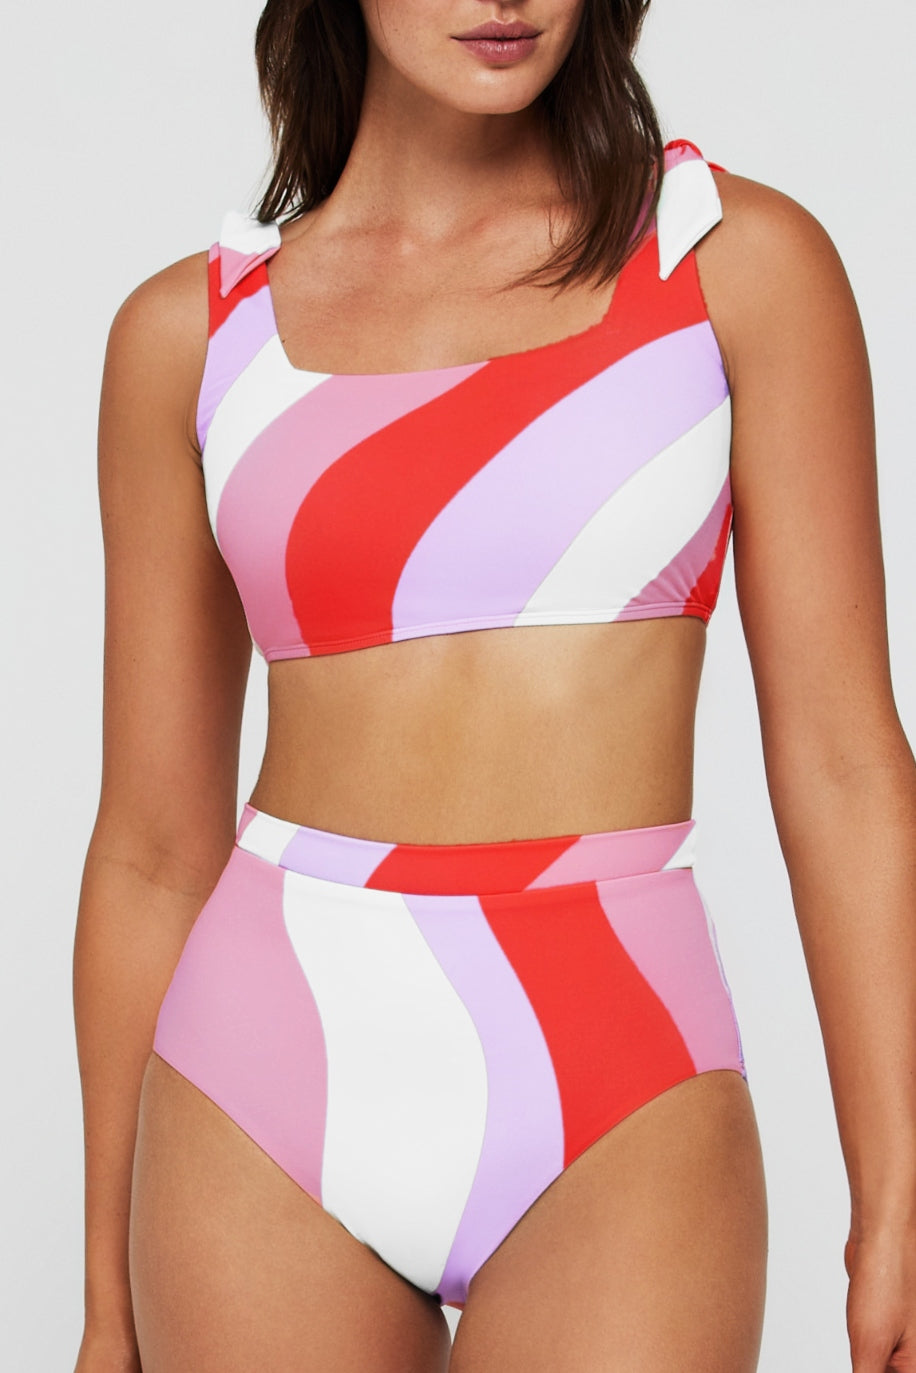 Lauren Two-Piece Swimsuit Top by Hermoza